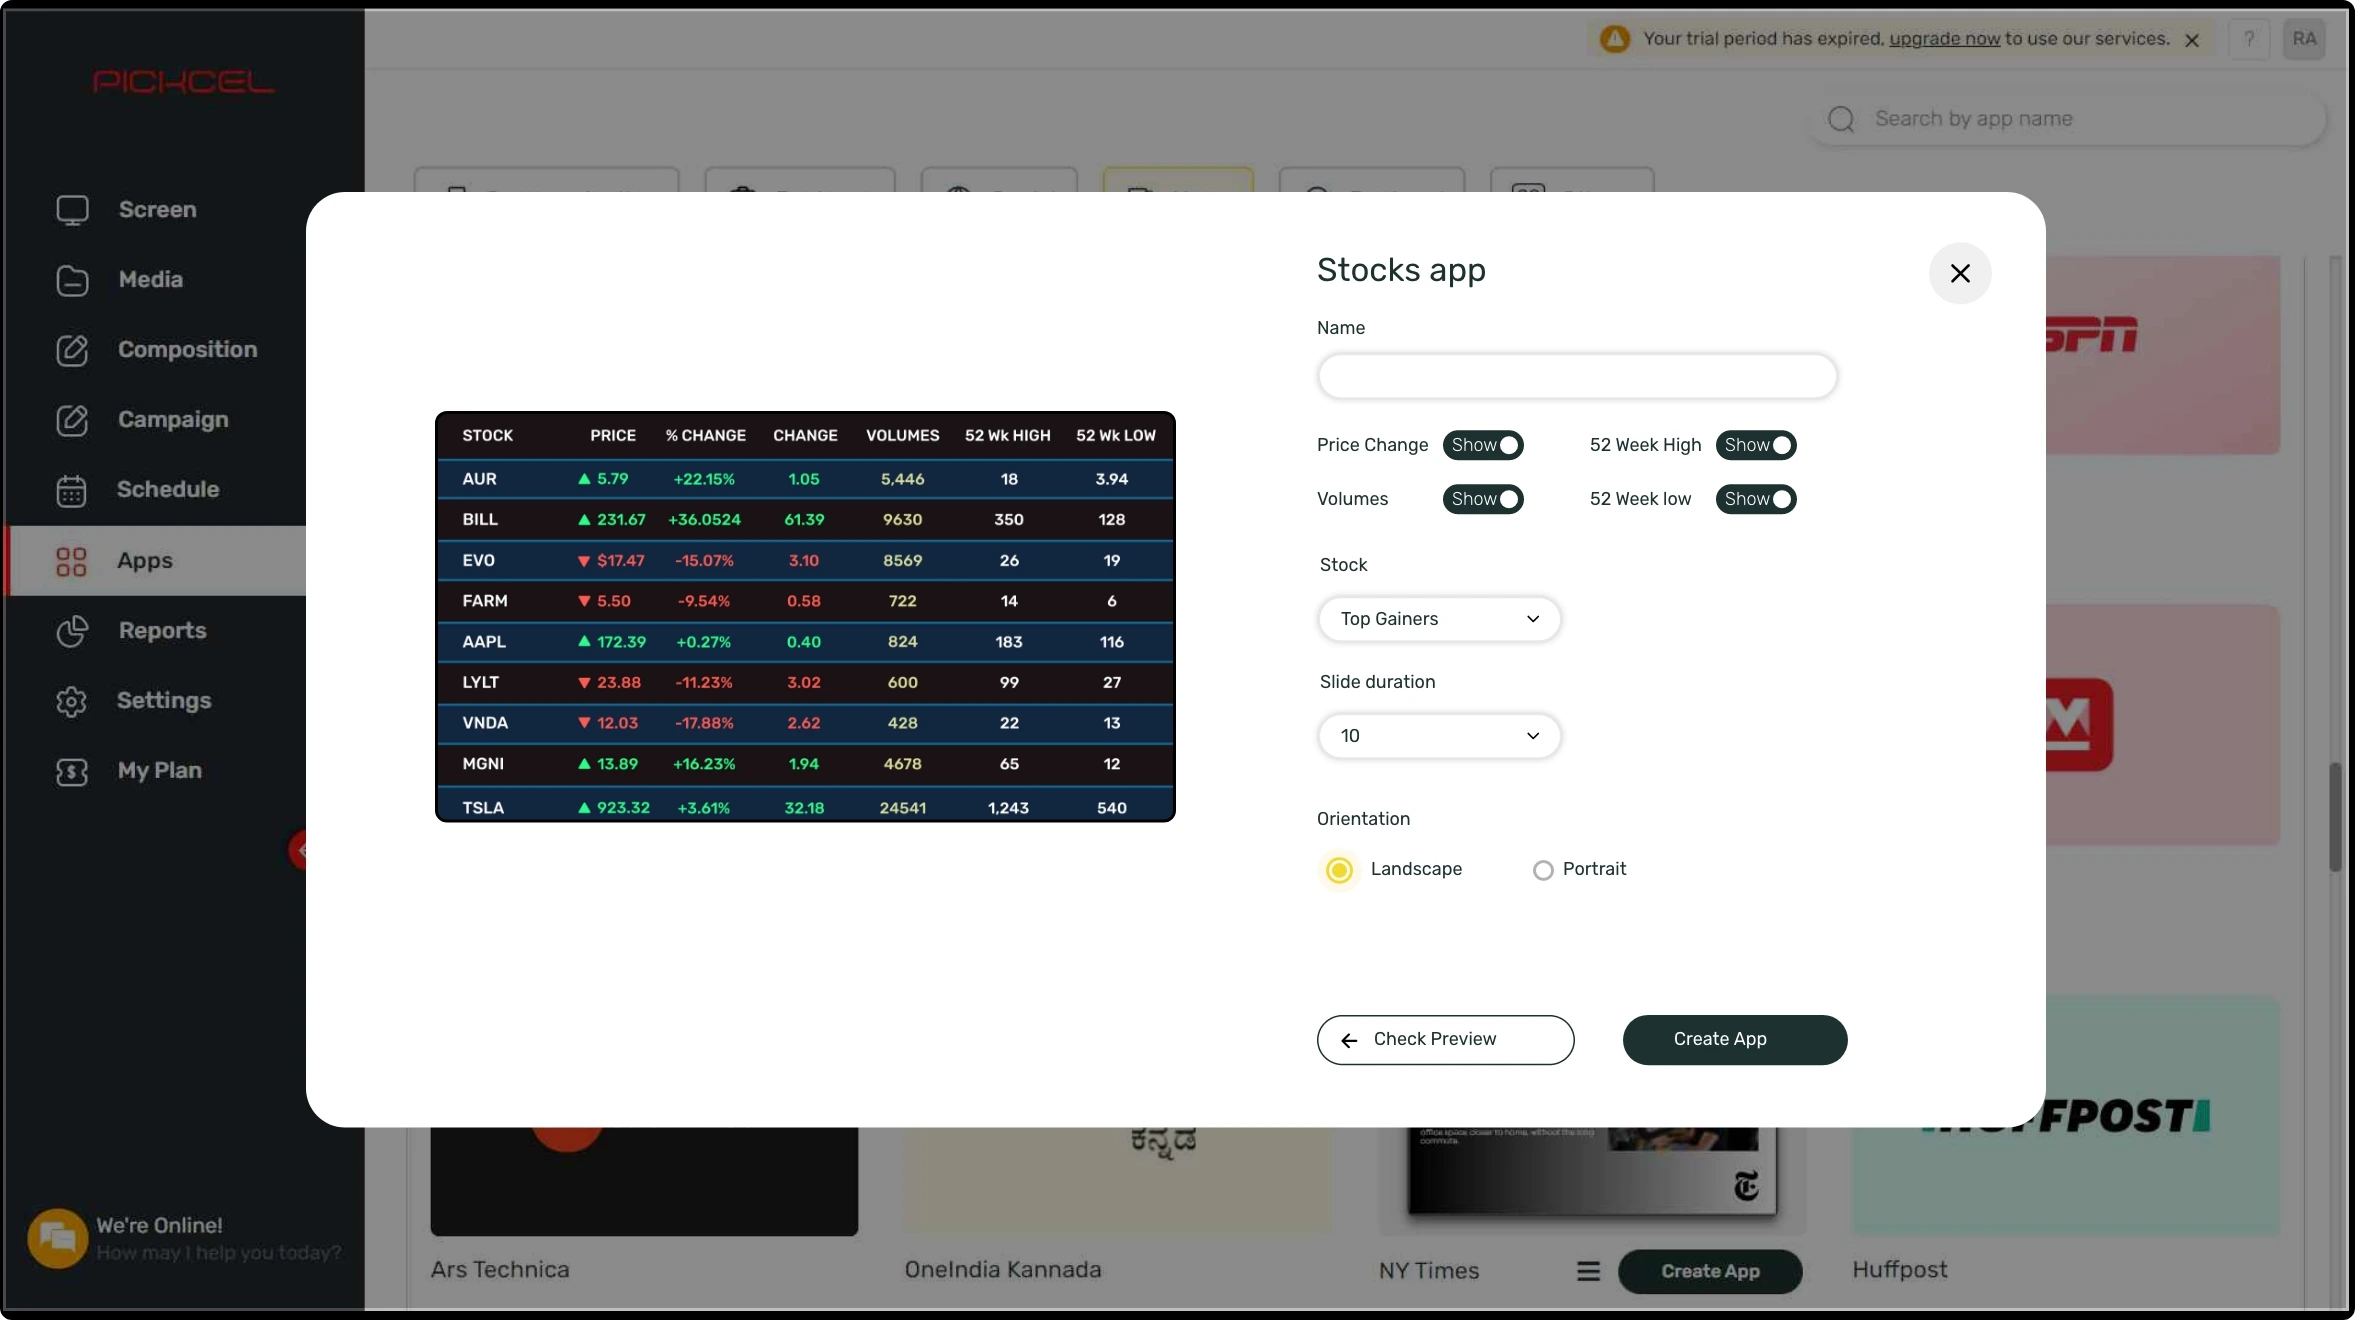 step 1 digital signage software interface showing Stocks App configuration window with multiple options